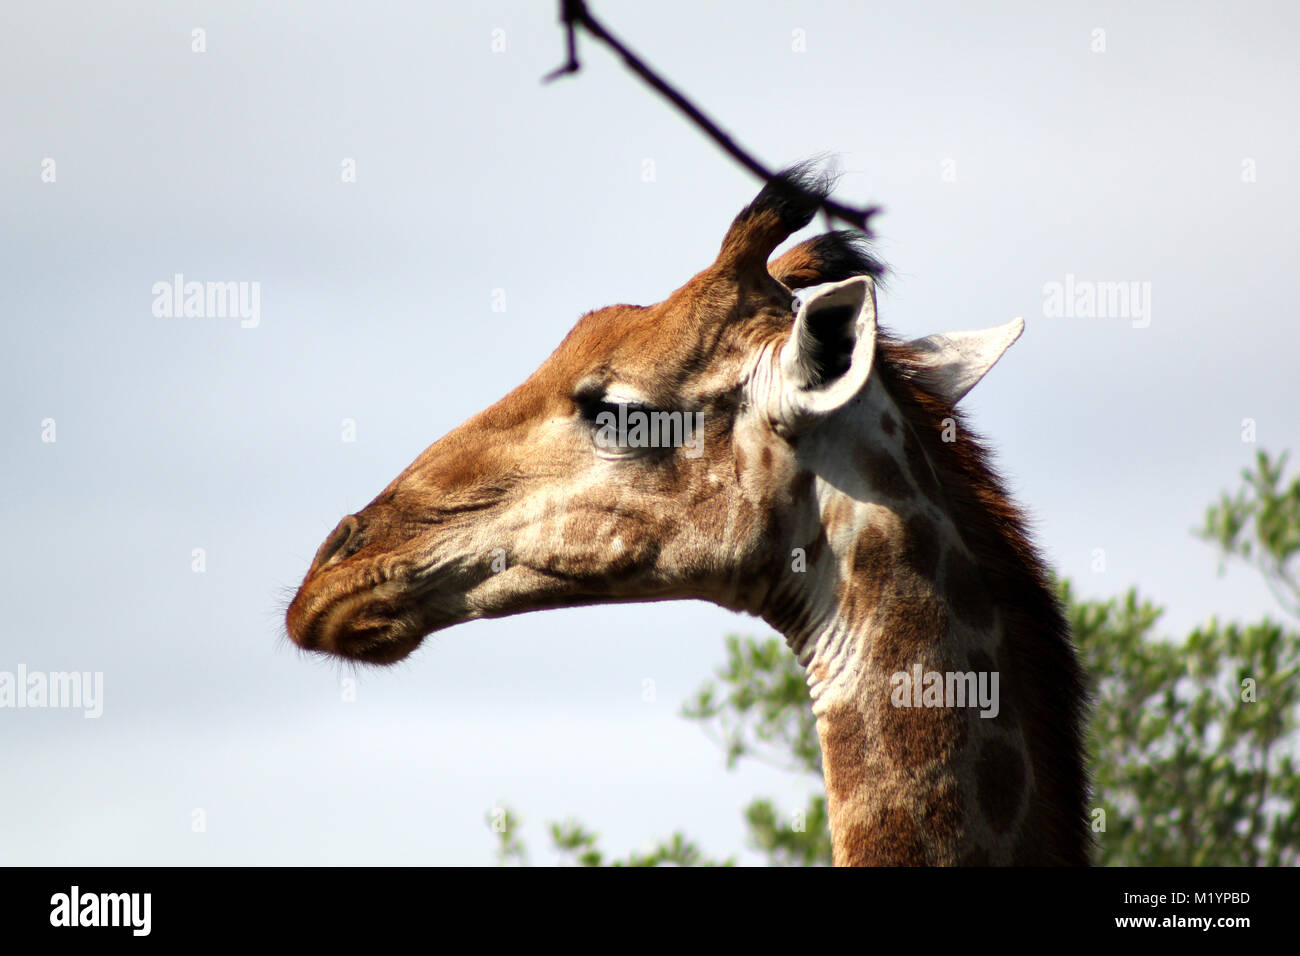 Giraffe at Kruger Park South Africa Stock Photo